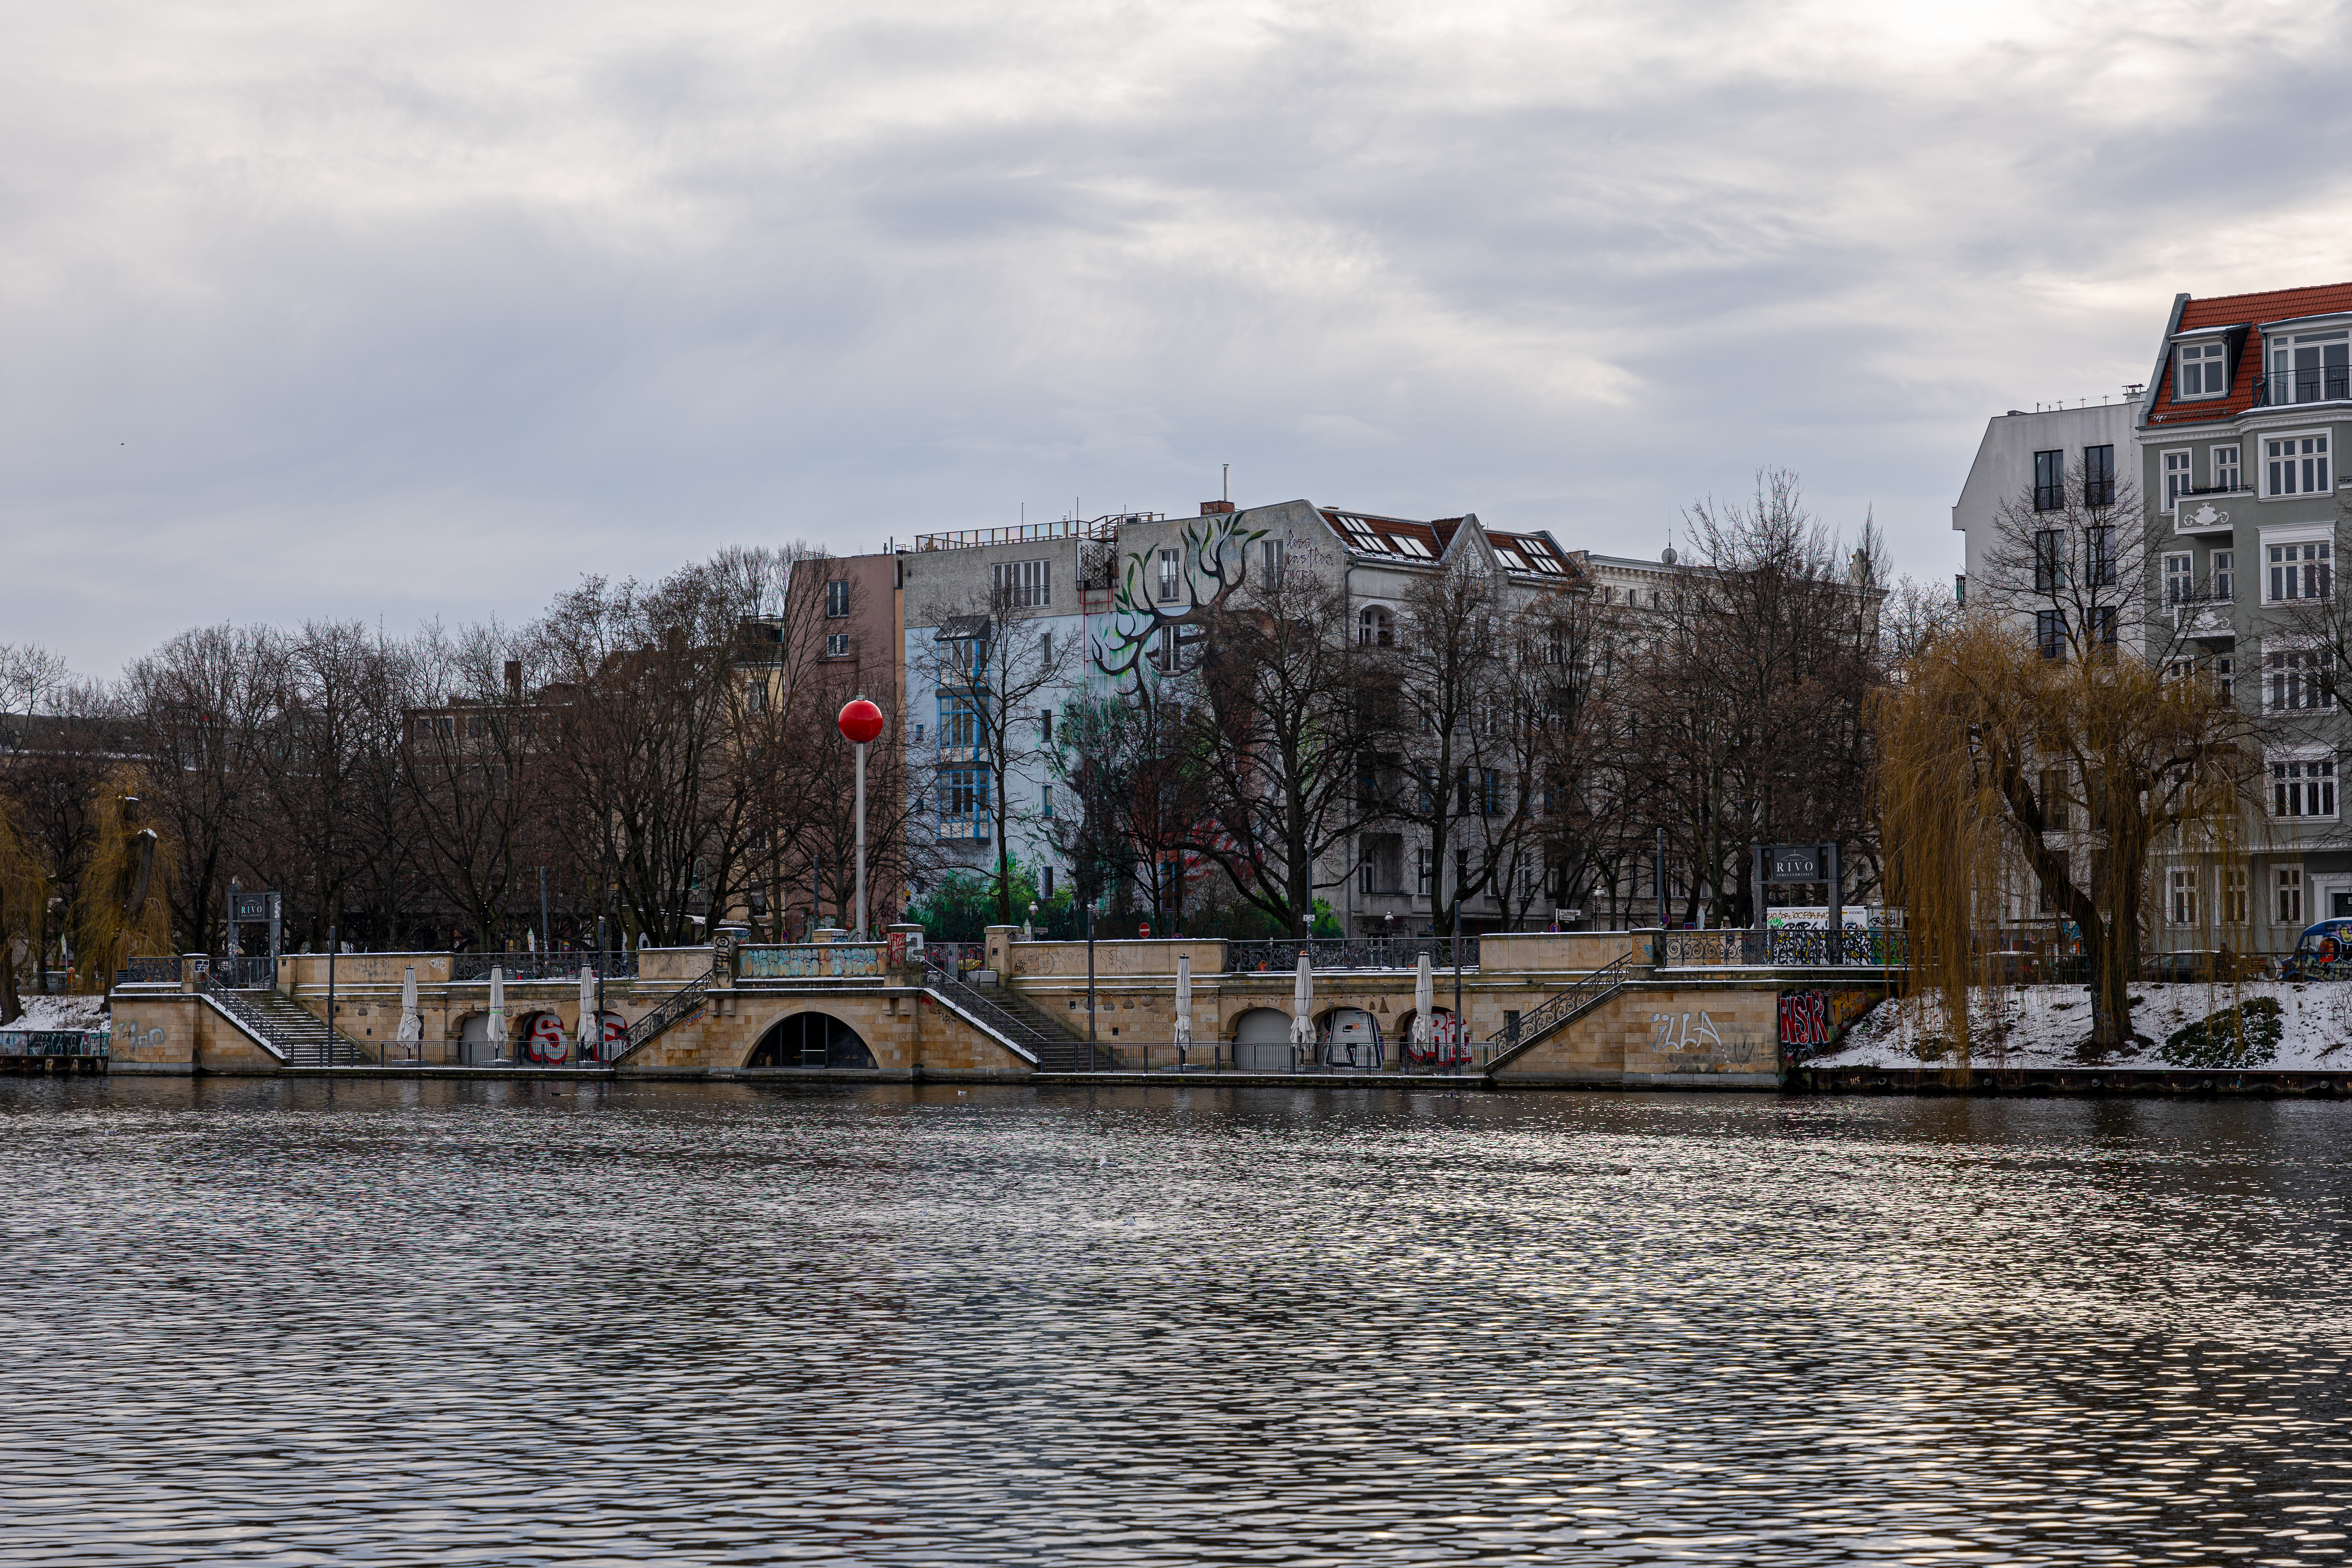 View across the Spree with a red ball in the middle.